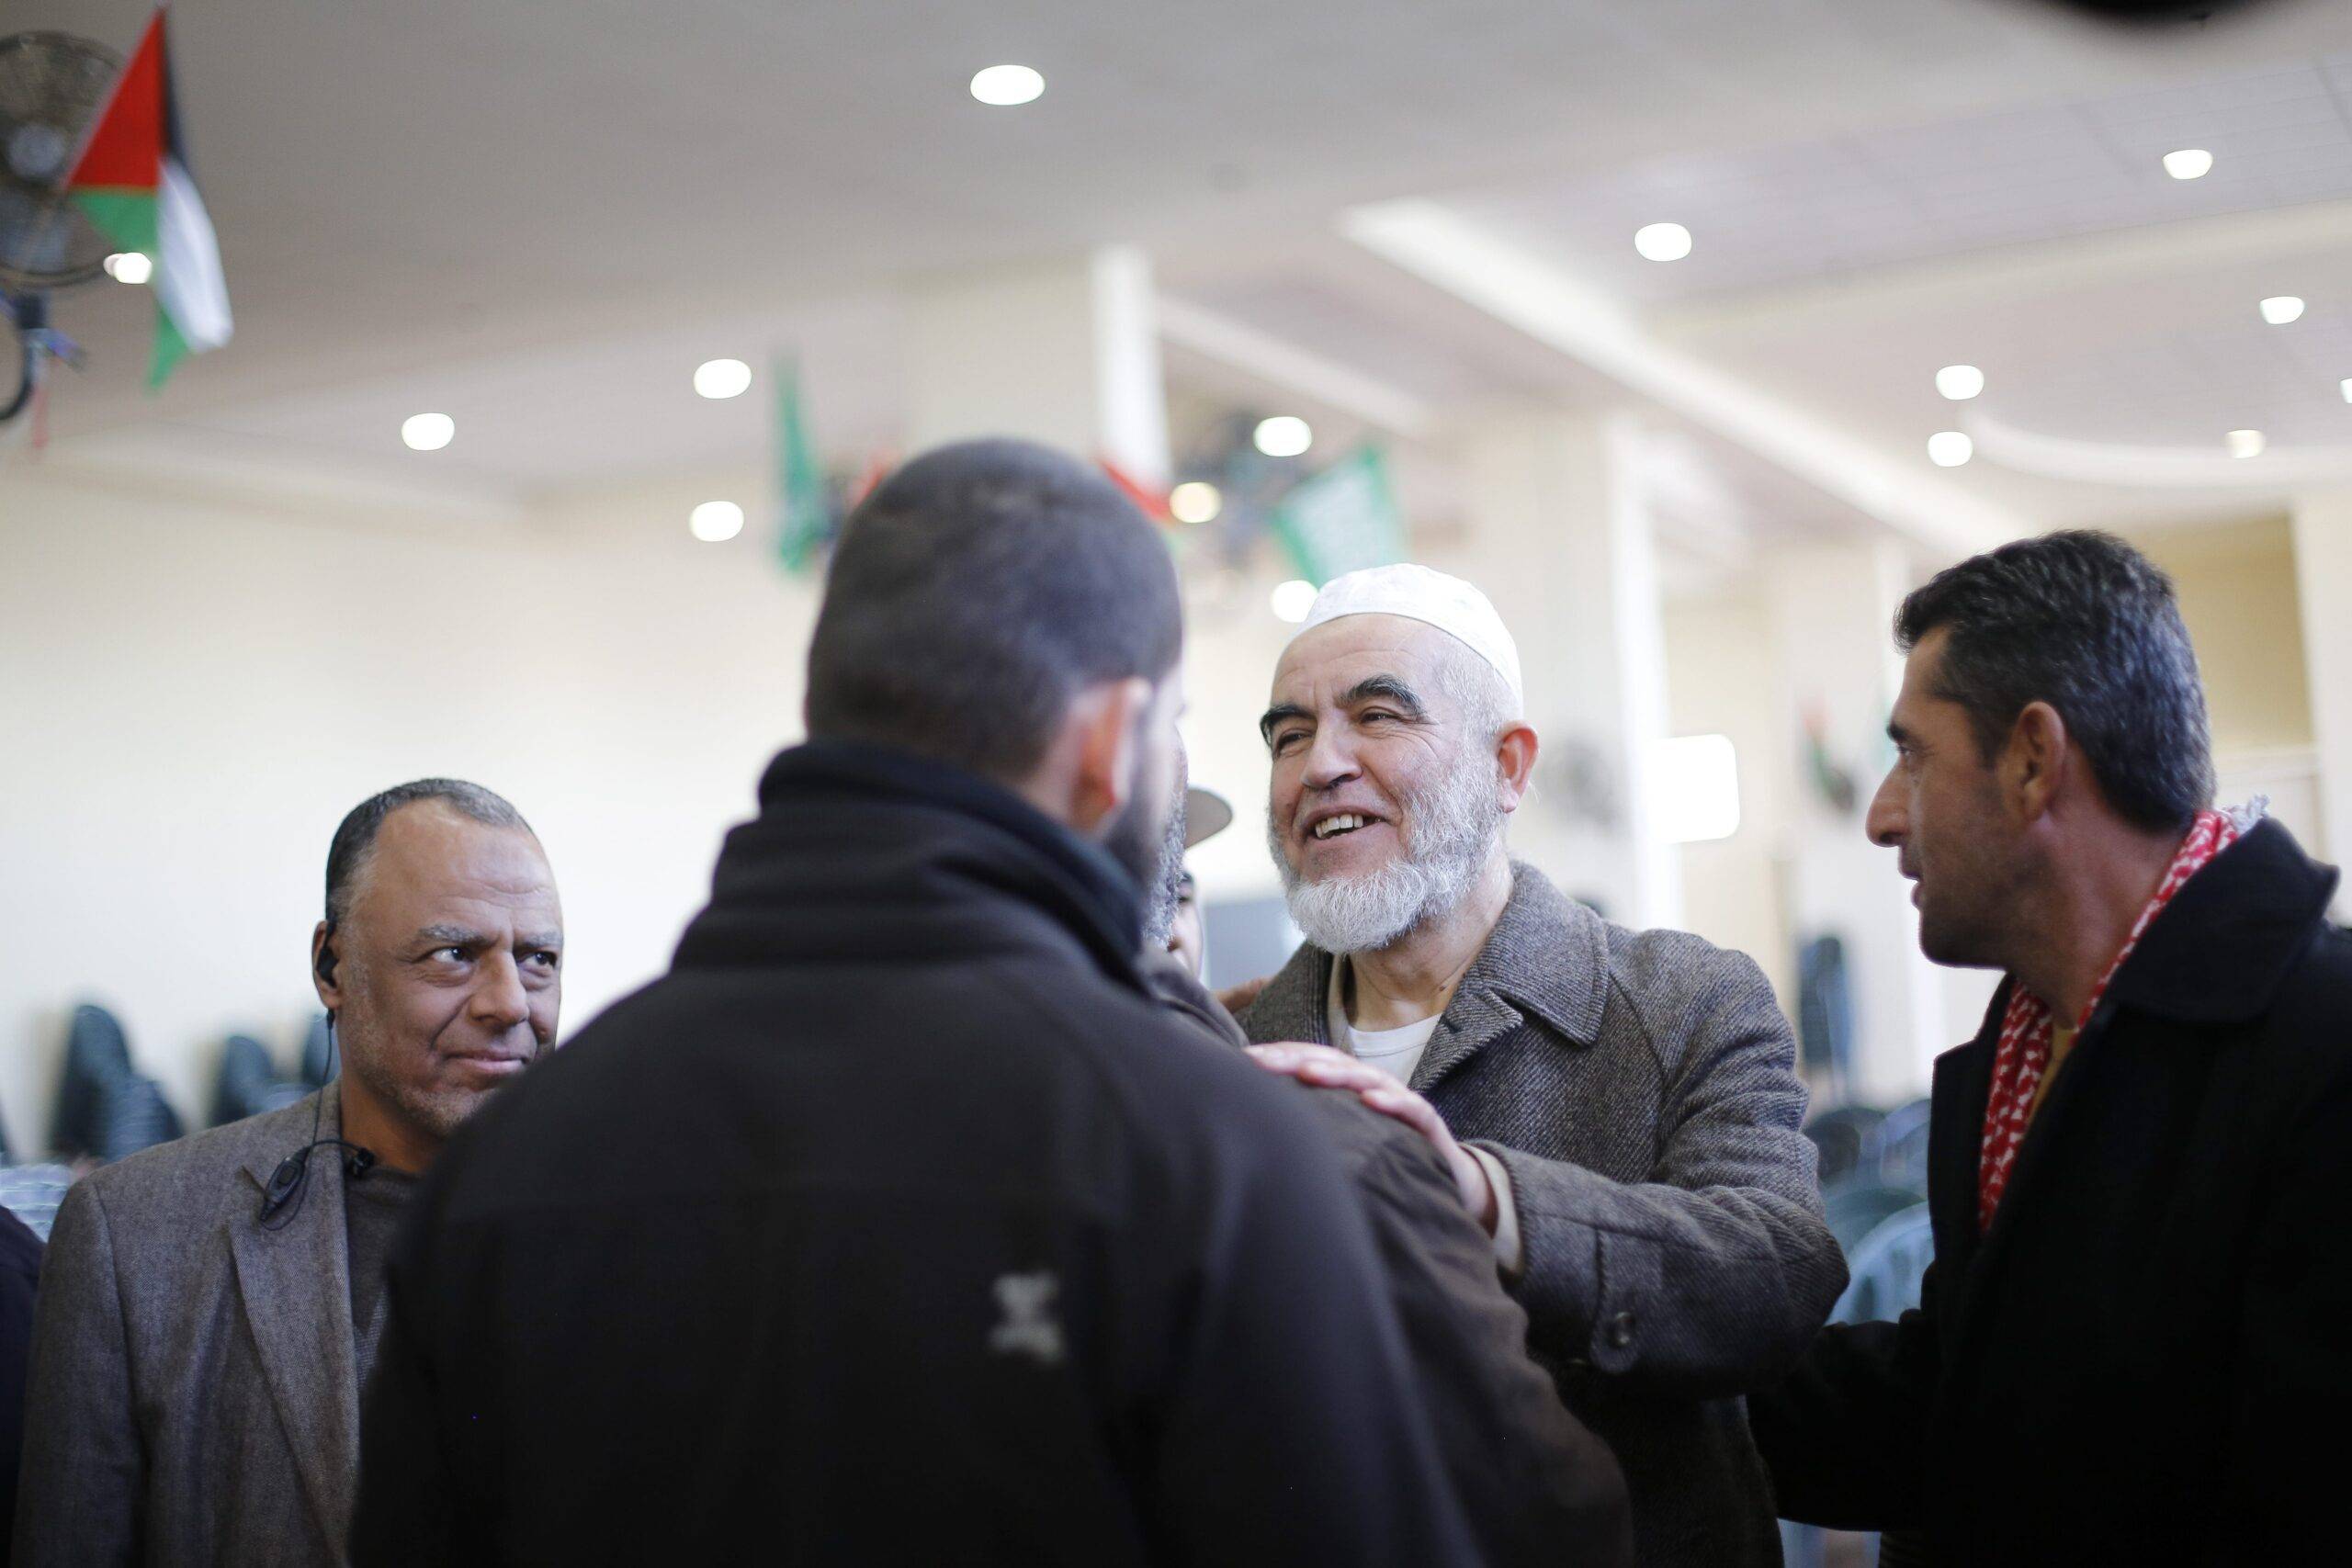 Image of Sheikh Raed Salah (2nd R) at his welcoming ceremony, after he was released from Israeli prison, in Israel on January 17 2017 [Mostafa Alkharouf/ Anadolu Agency]